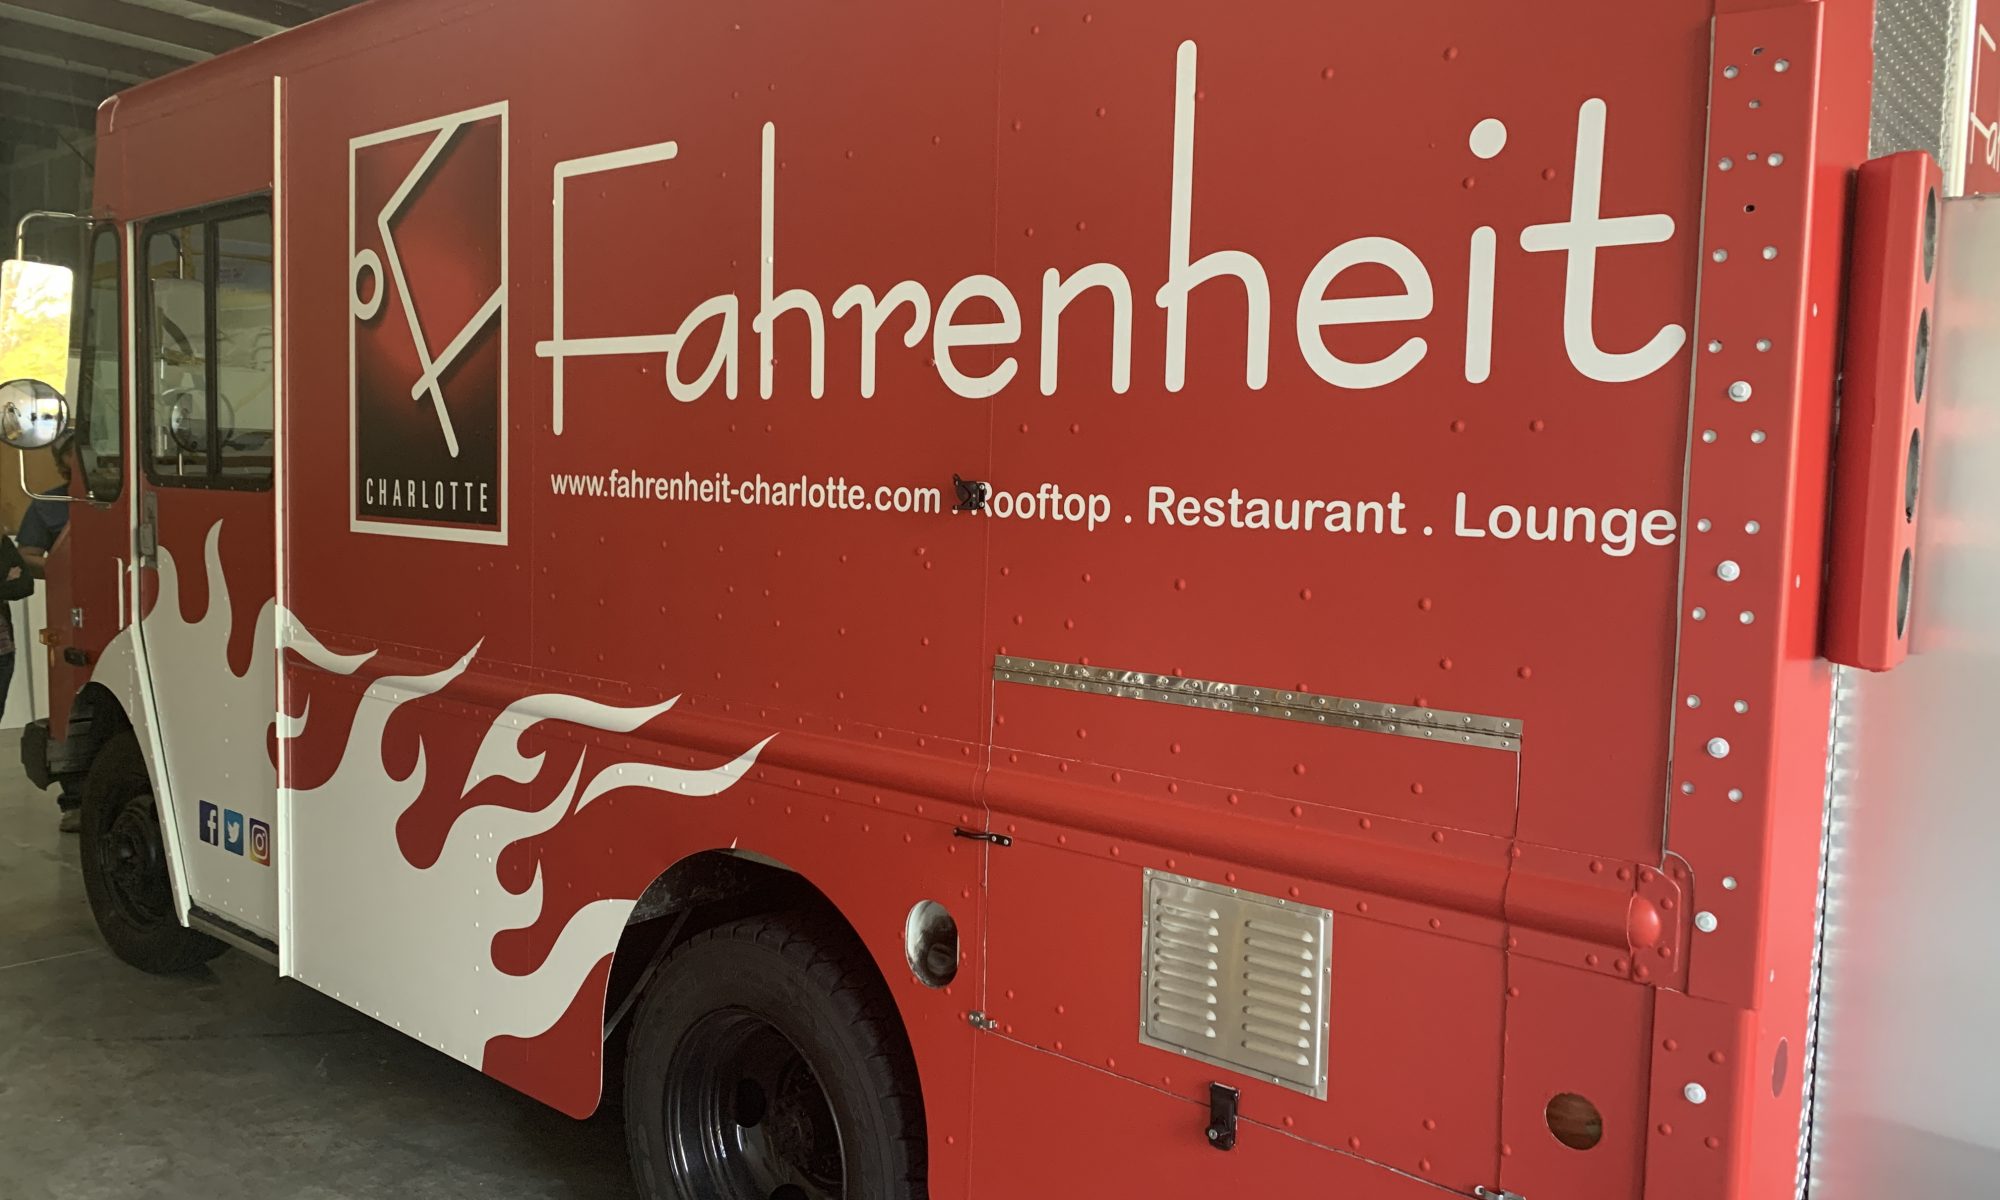 Fahrenheit Commercial Truck Wraps in Charlotte, NC